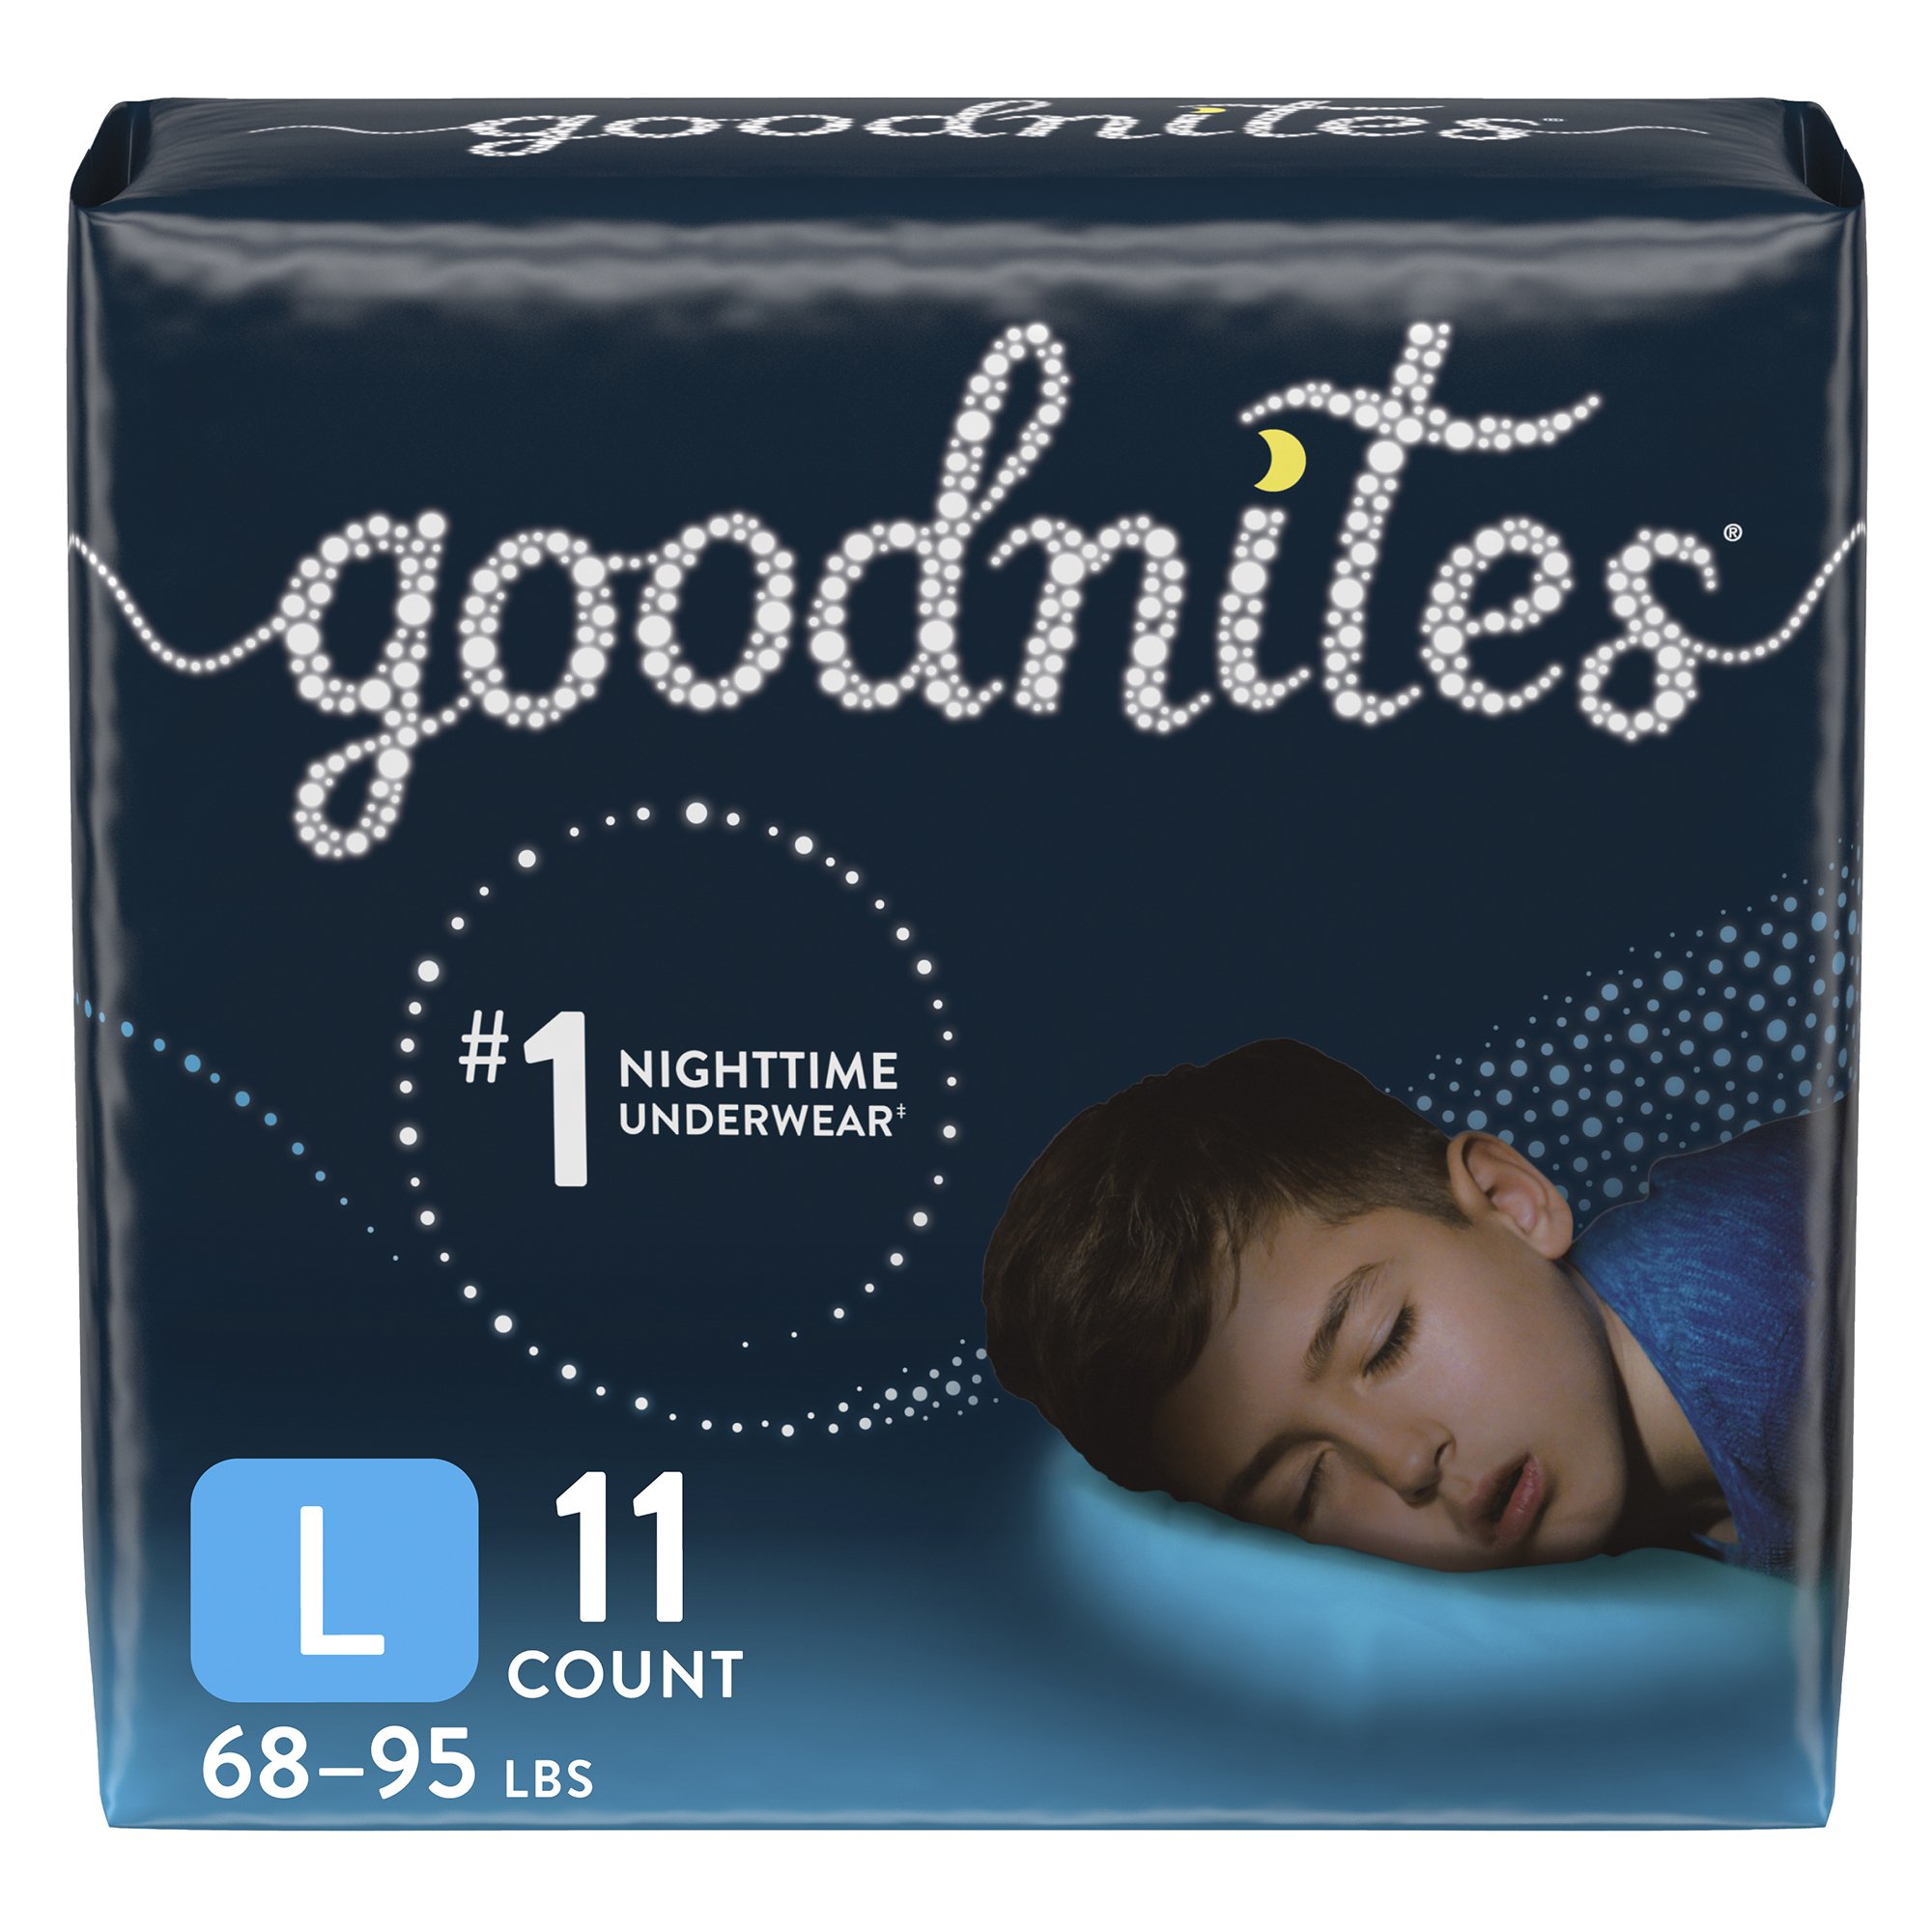 Goodnites NightTime Bedtime Underwear For Boys Fits Sizes10-12 (L) 11 Count